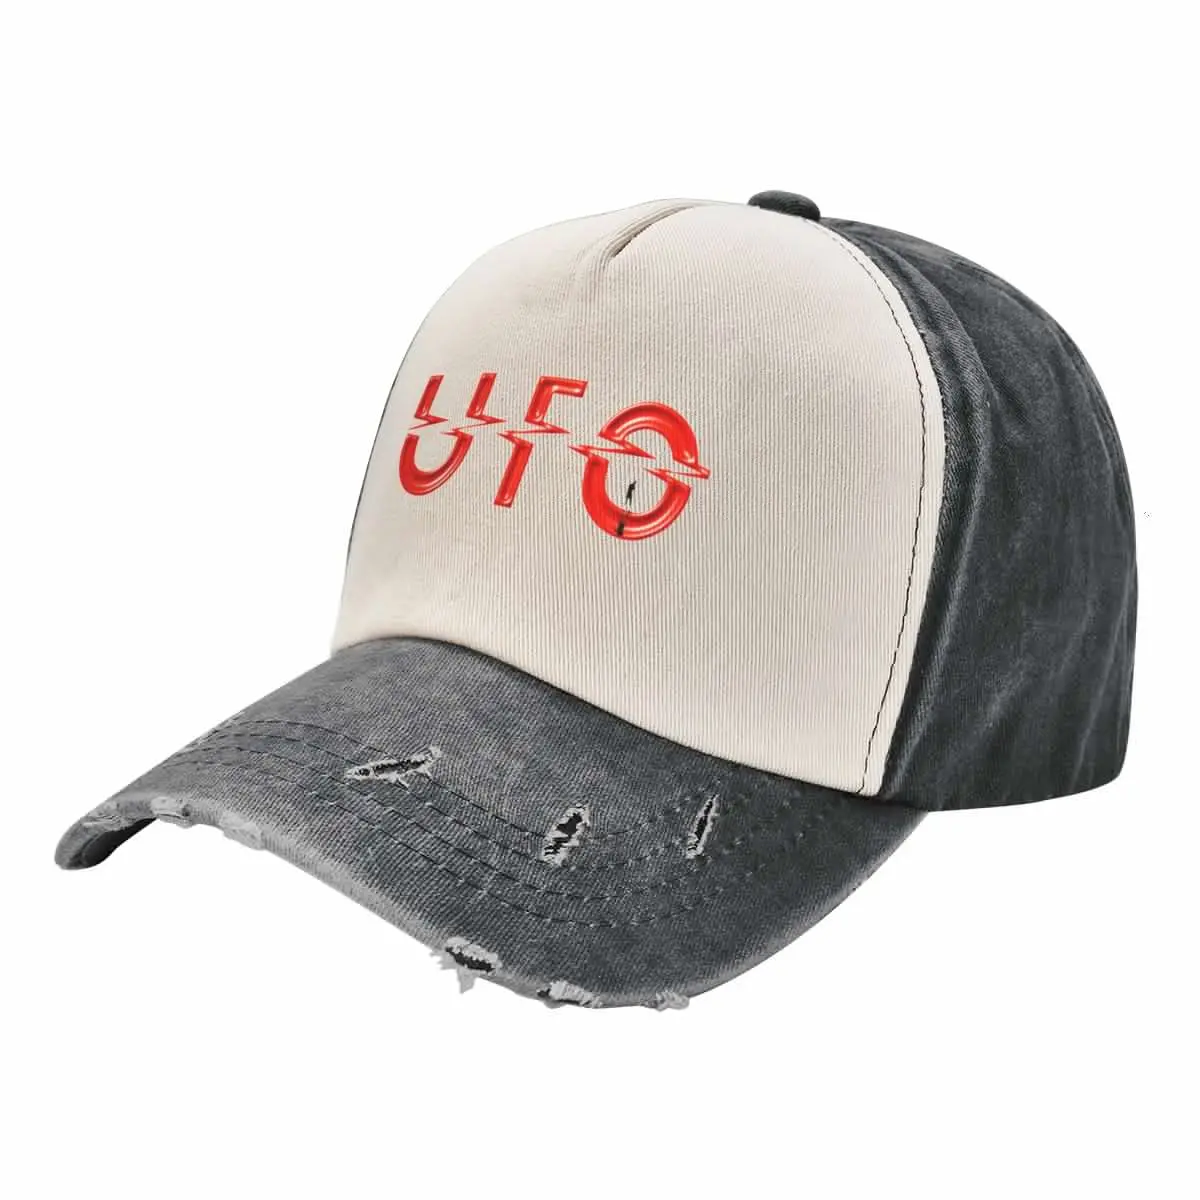 

UFO are an English rock band that was formed in London in 1968 Baseball Cap Anime Luxury Brand New Hat Women's Men's